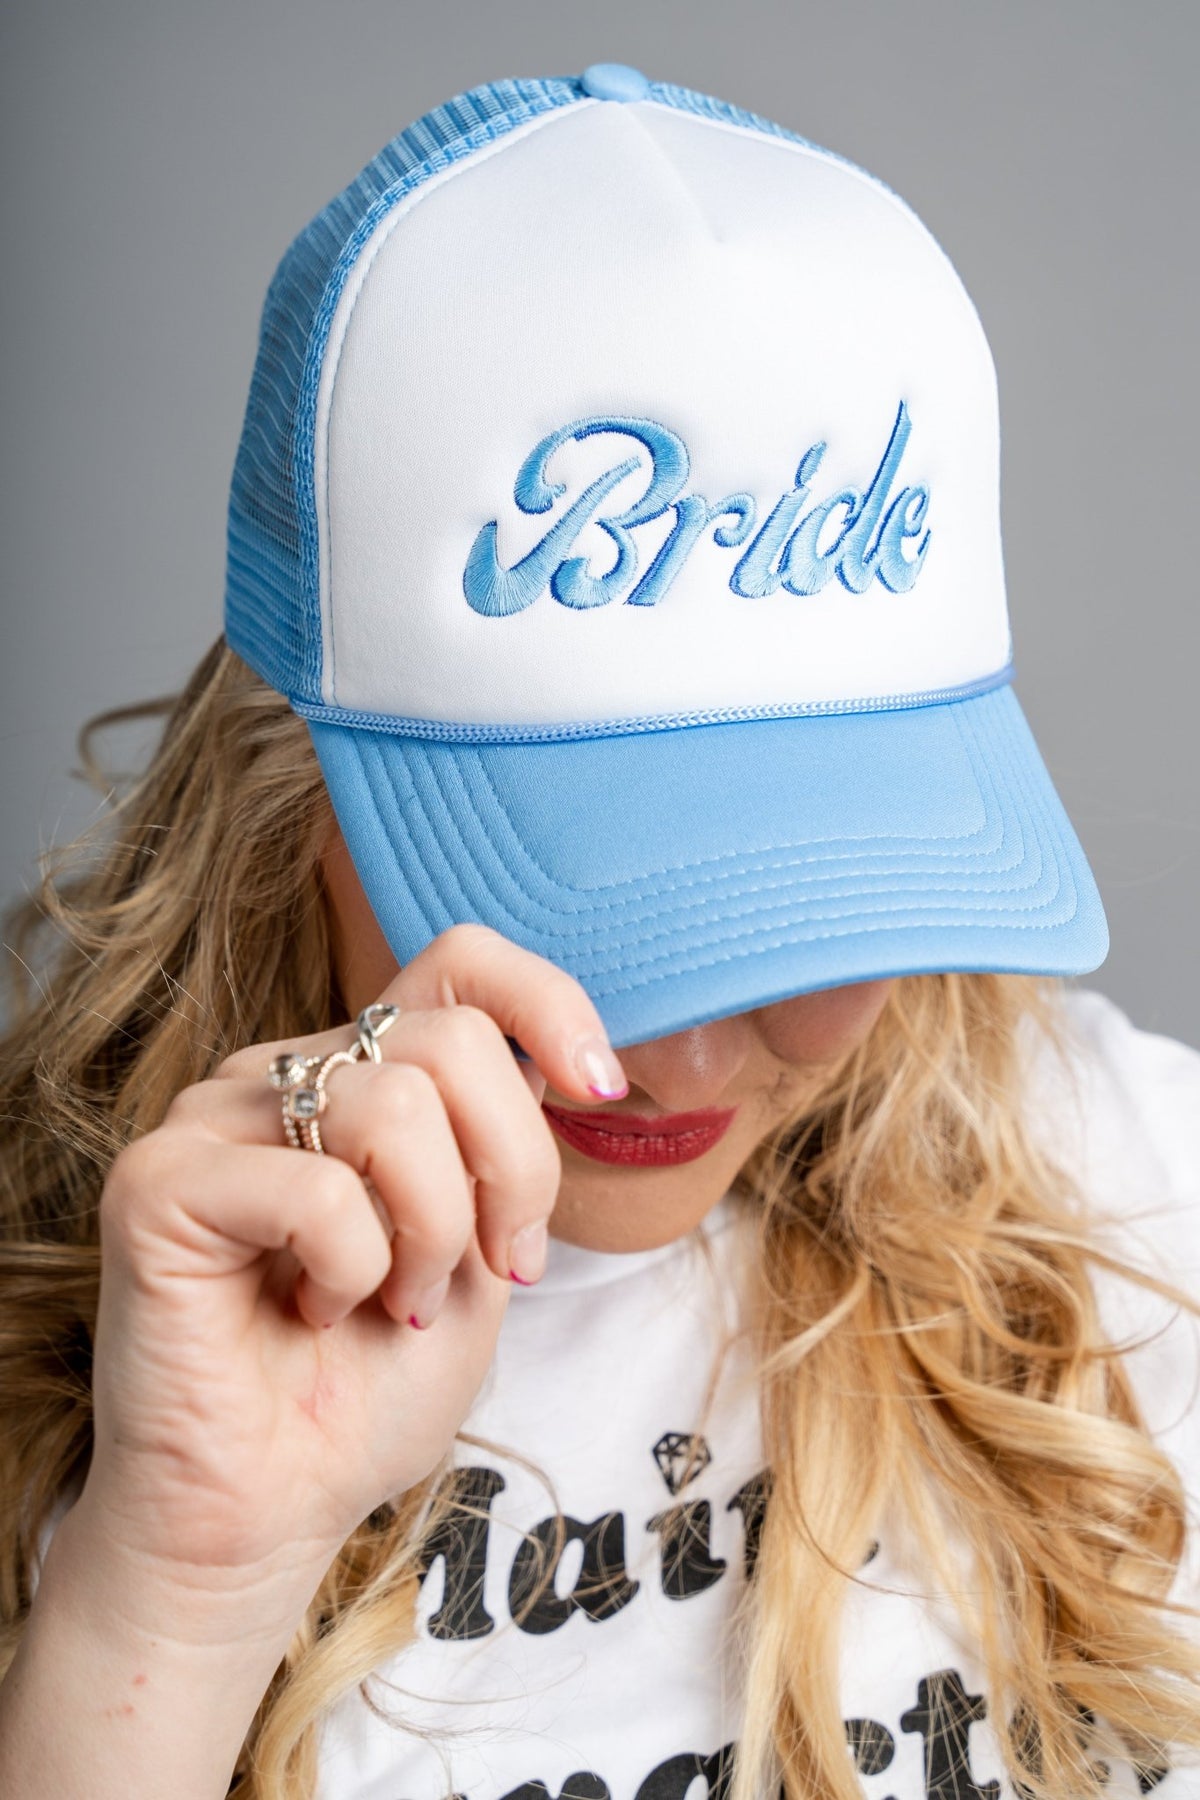 Bride groovy font trucker hat - Trendy Hats at Lush Fashion Lounge Boutique in Oklahoma City